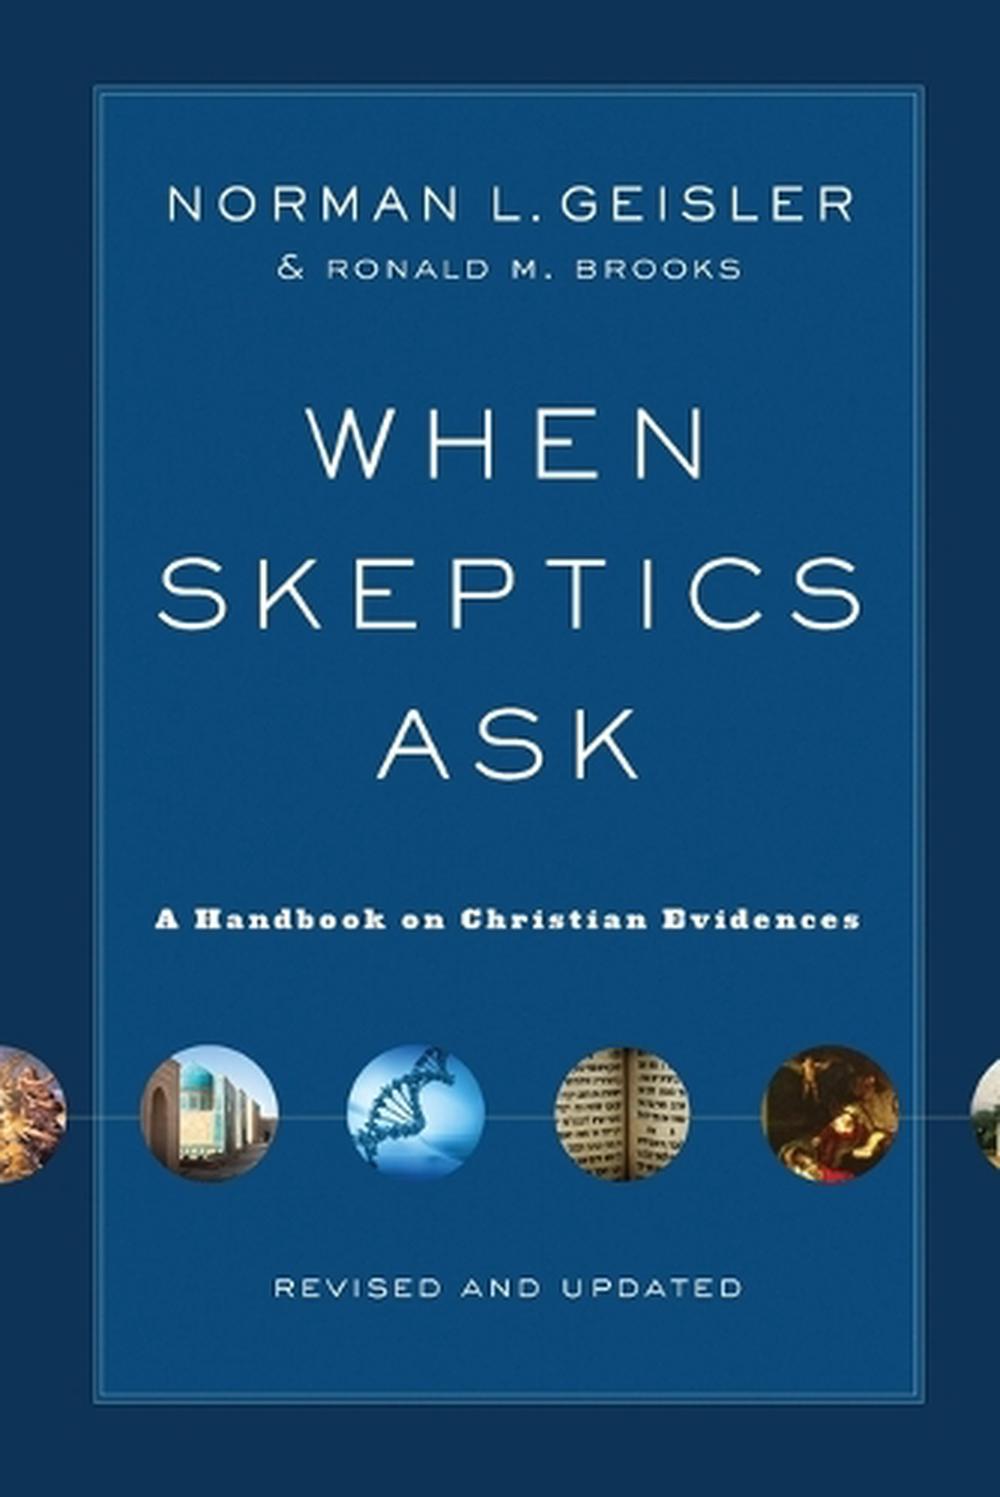 When Skeptics Ask A Handbook on Christian Evidences by Norman L